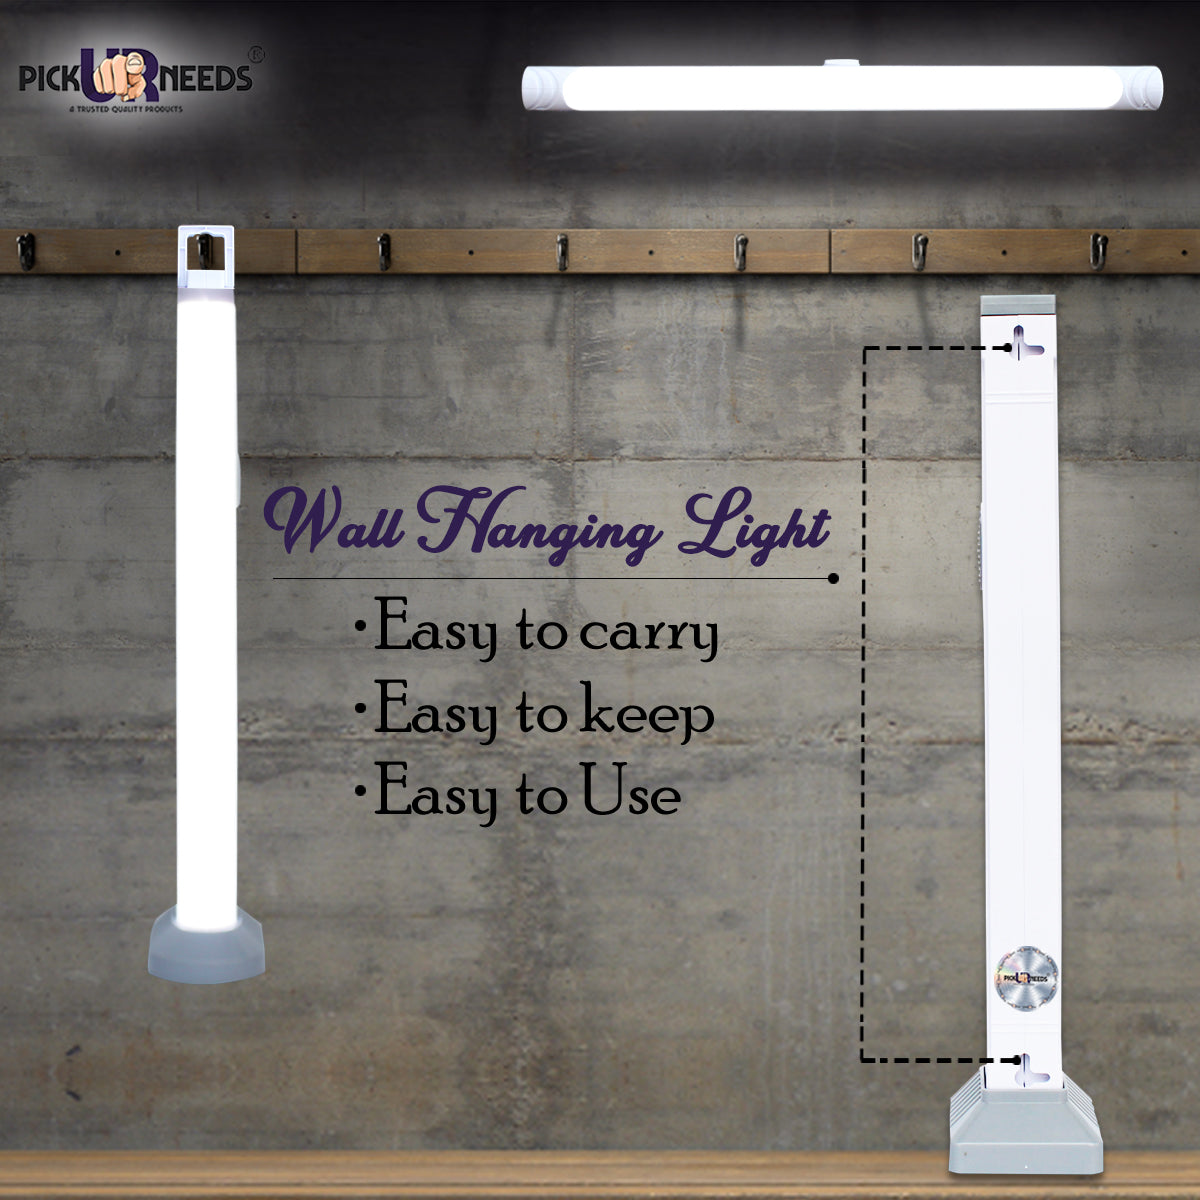 Pick Ur Needs® Super Bright Plastic Emergency Long Tube Light with Low and High Mode